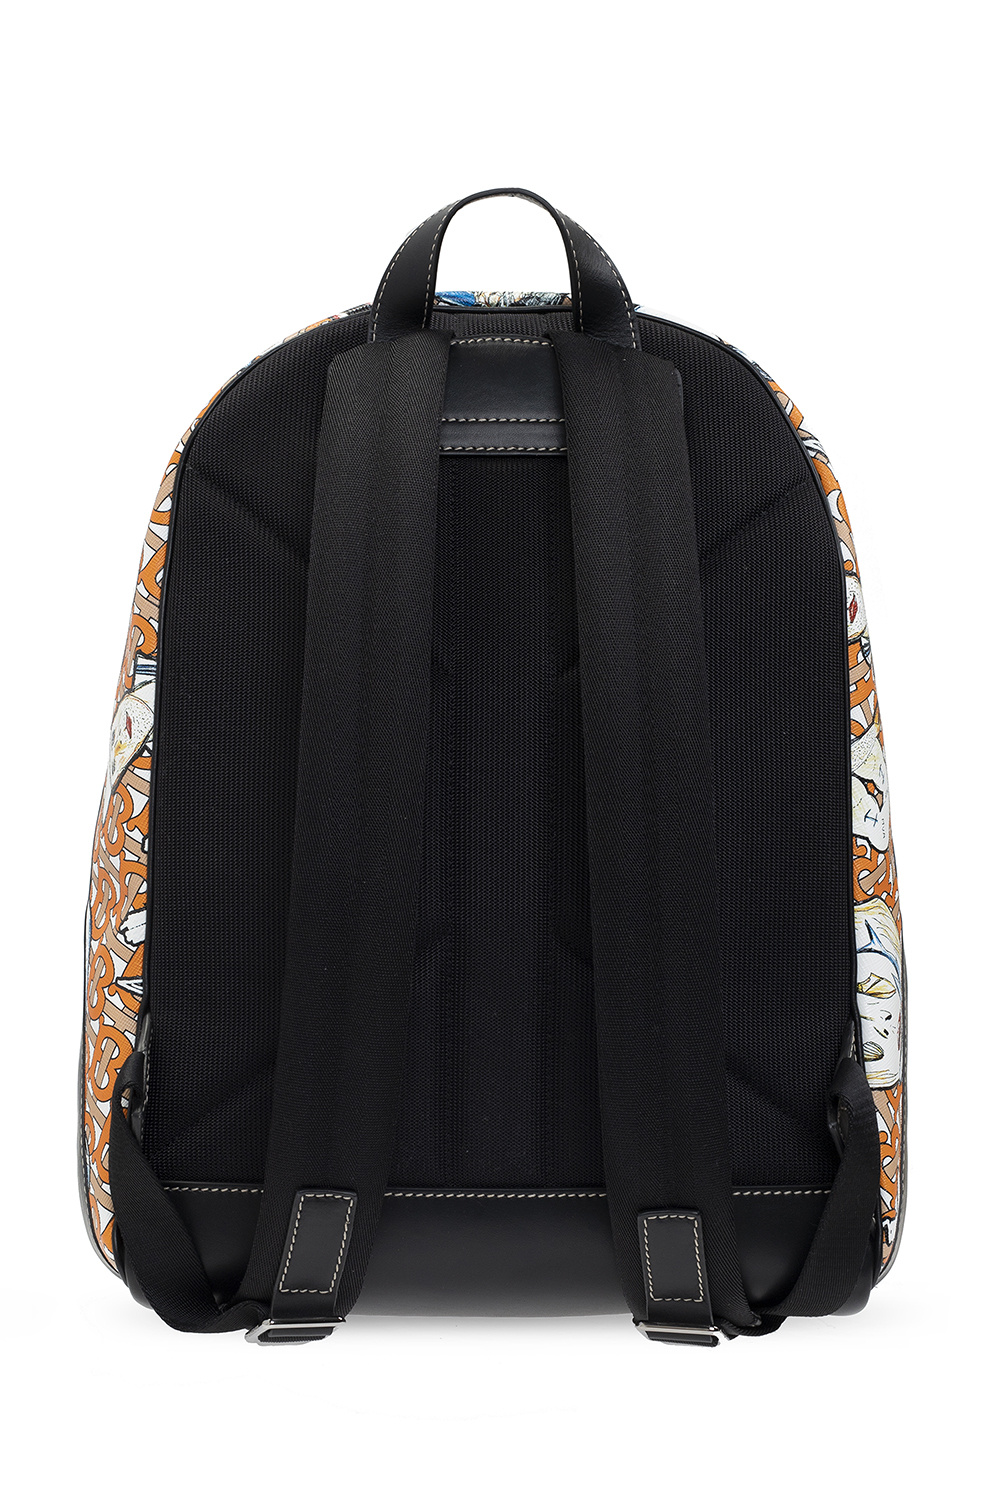 burberry Today Printed backpack